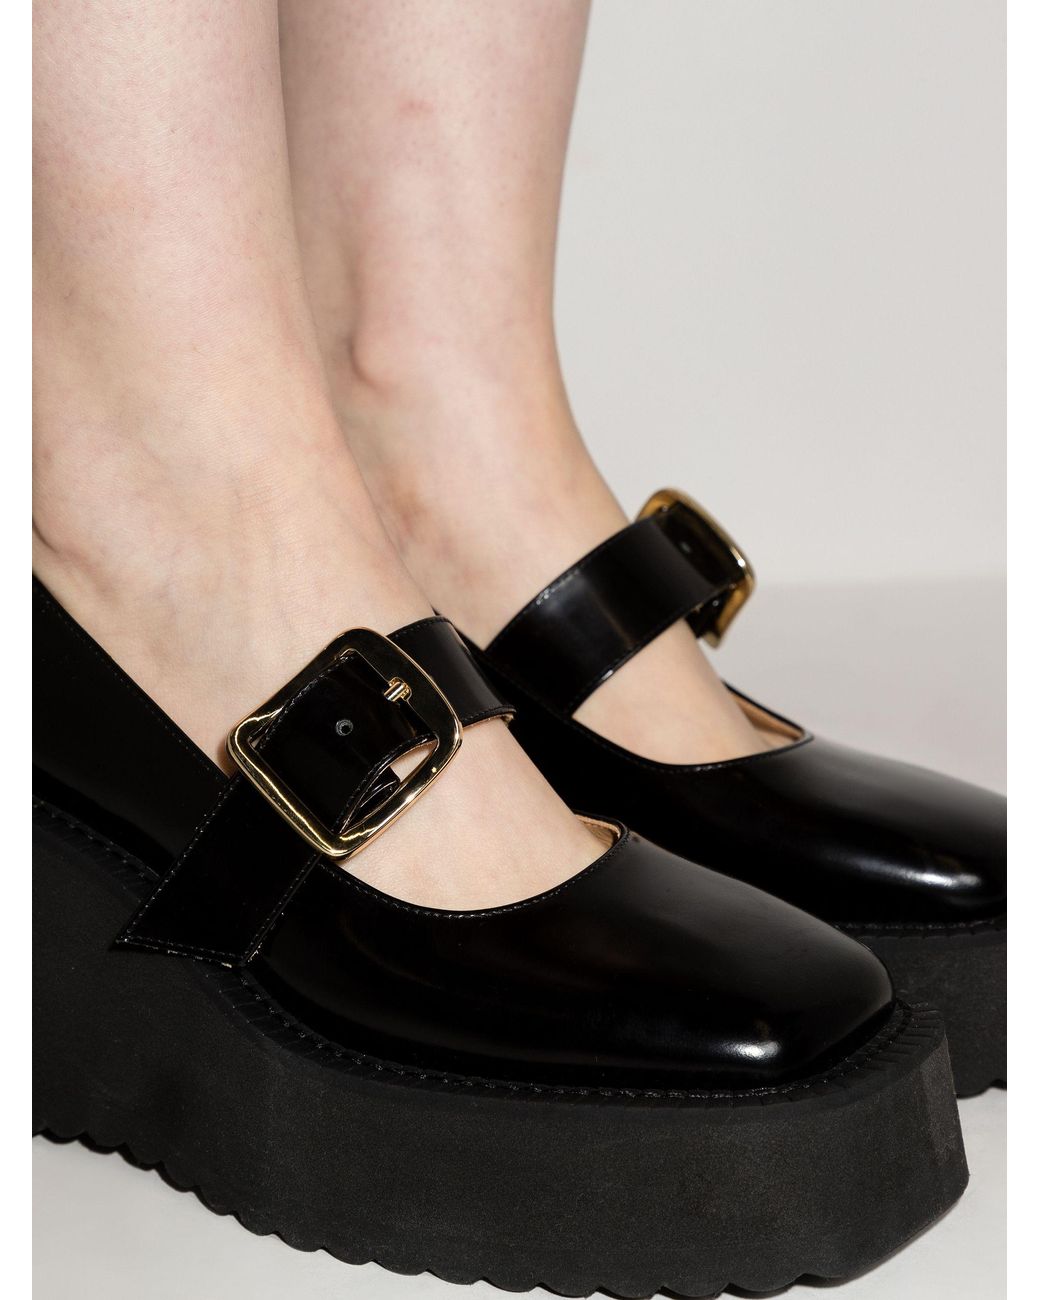 MM6 by Maison Martin Margiela 40 Leather Mary Jane Wedge Pumps in